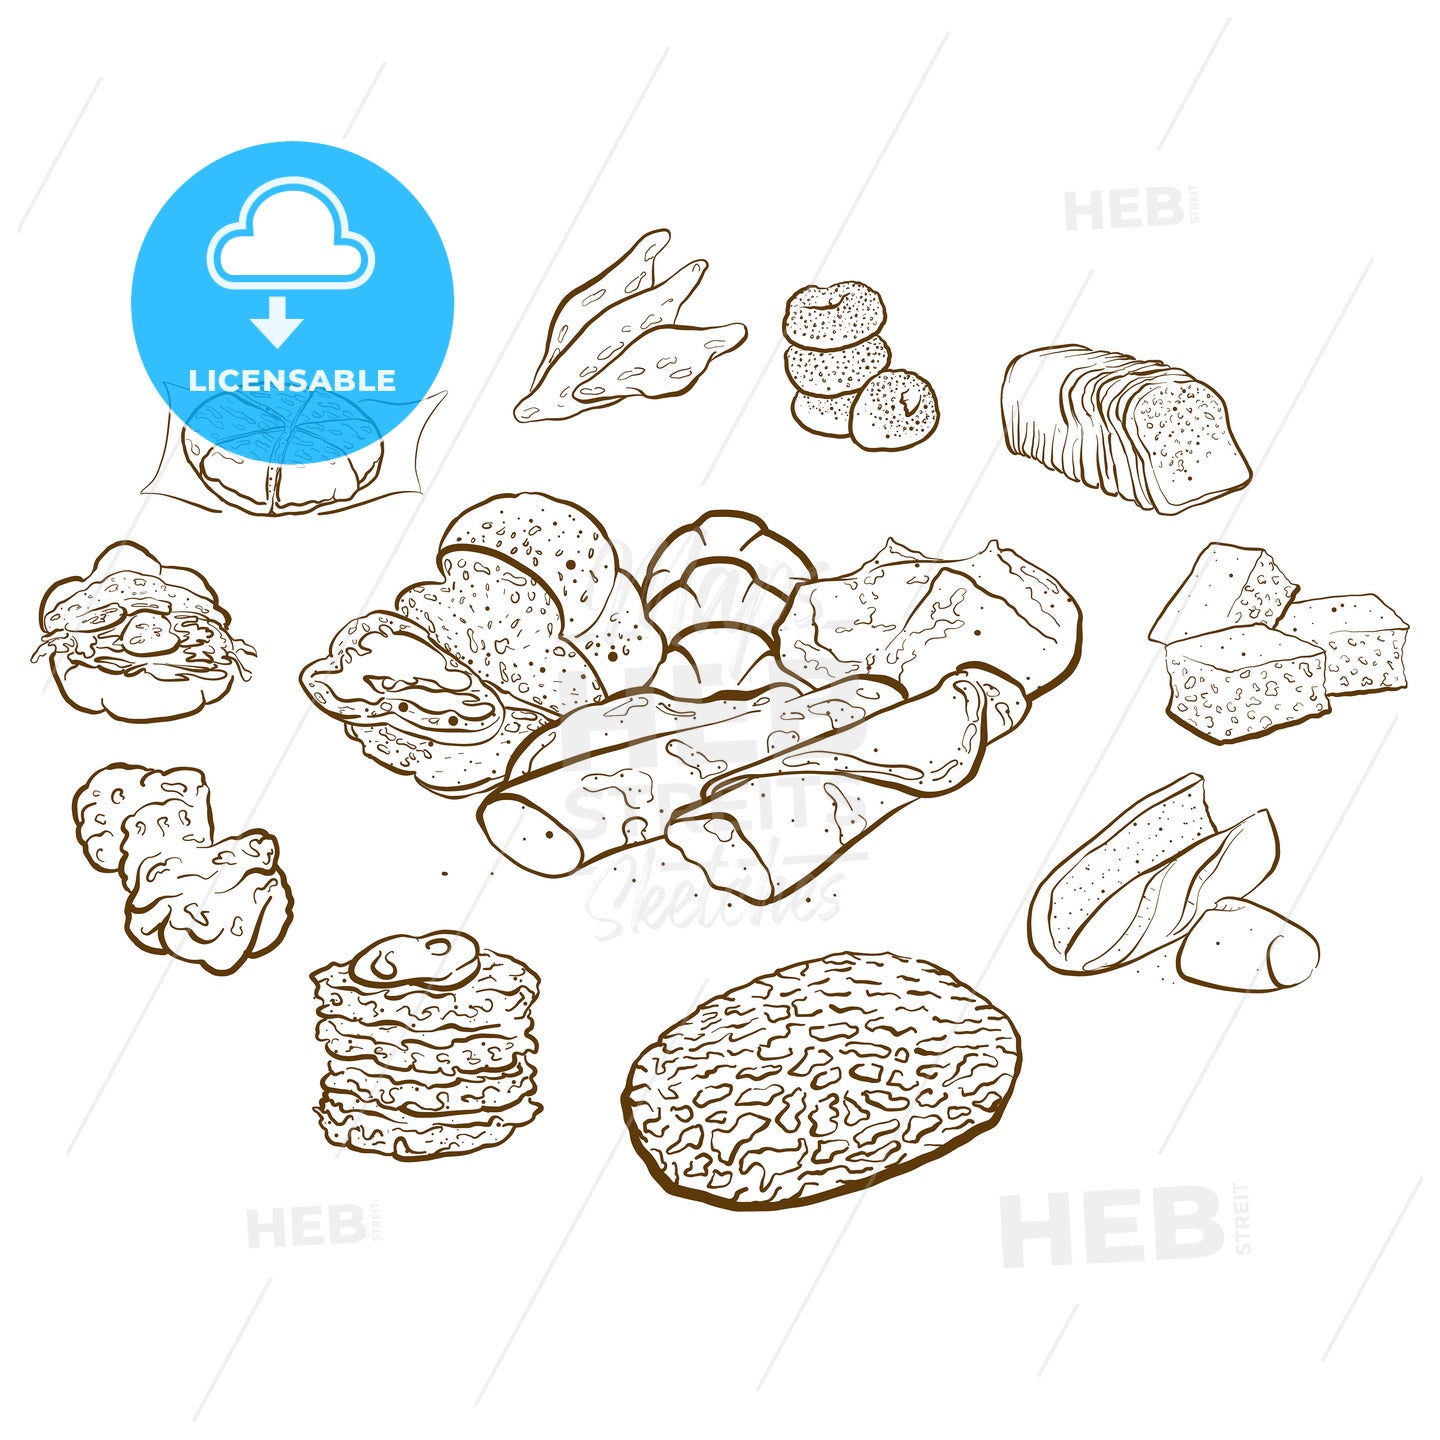 Outline version of Circle shape composition from hand drawn bread – instant download